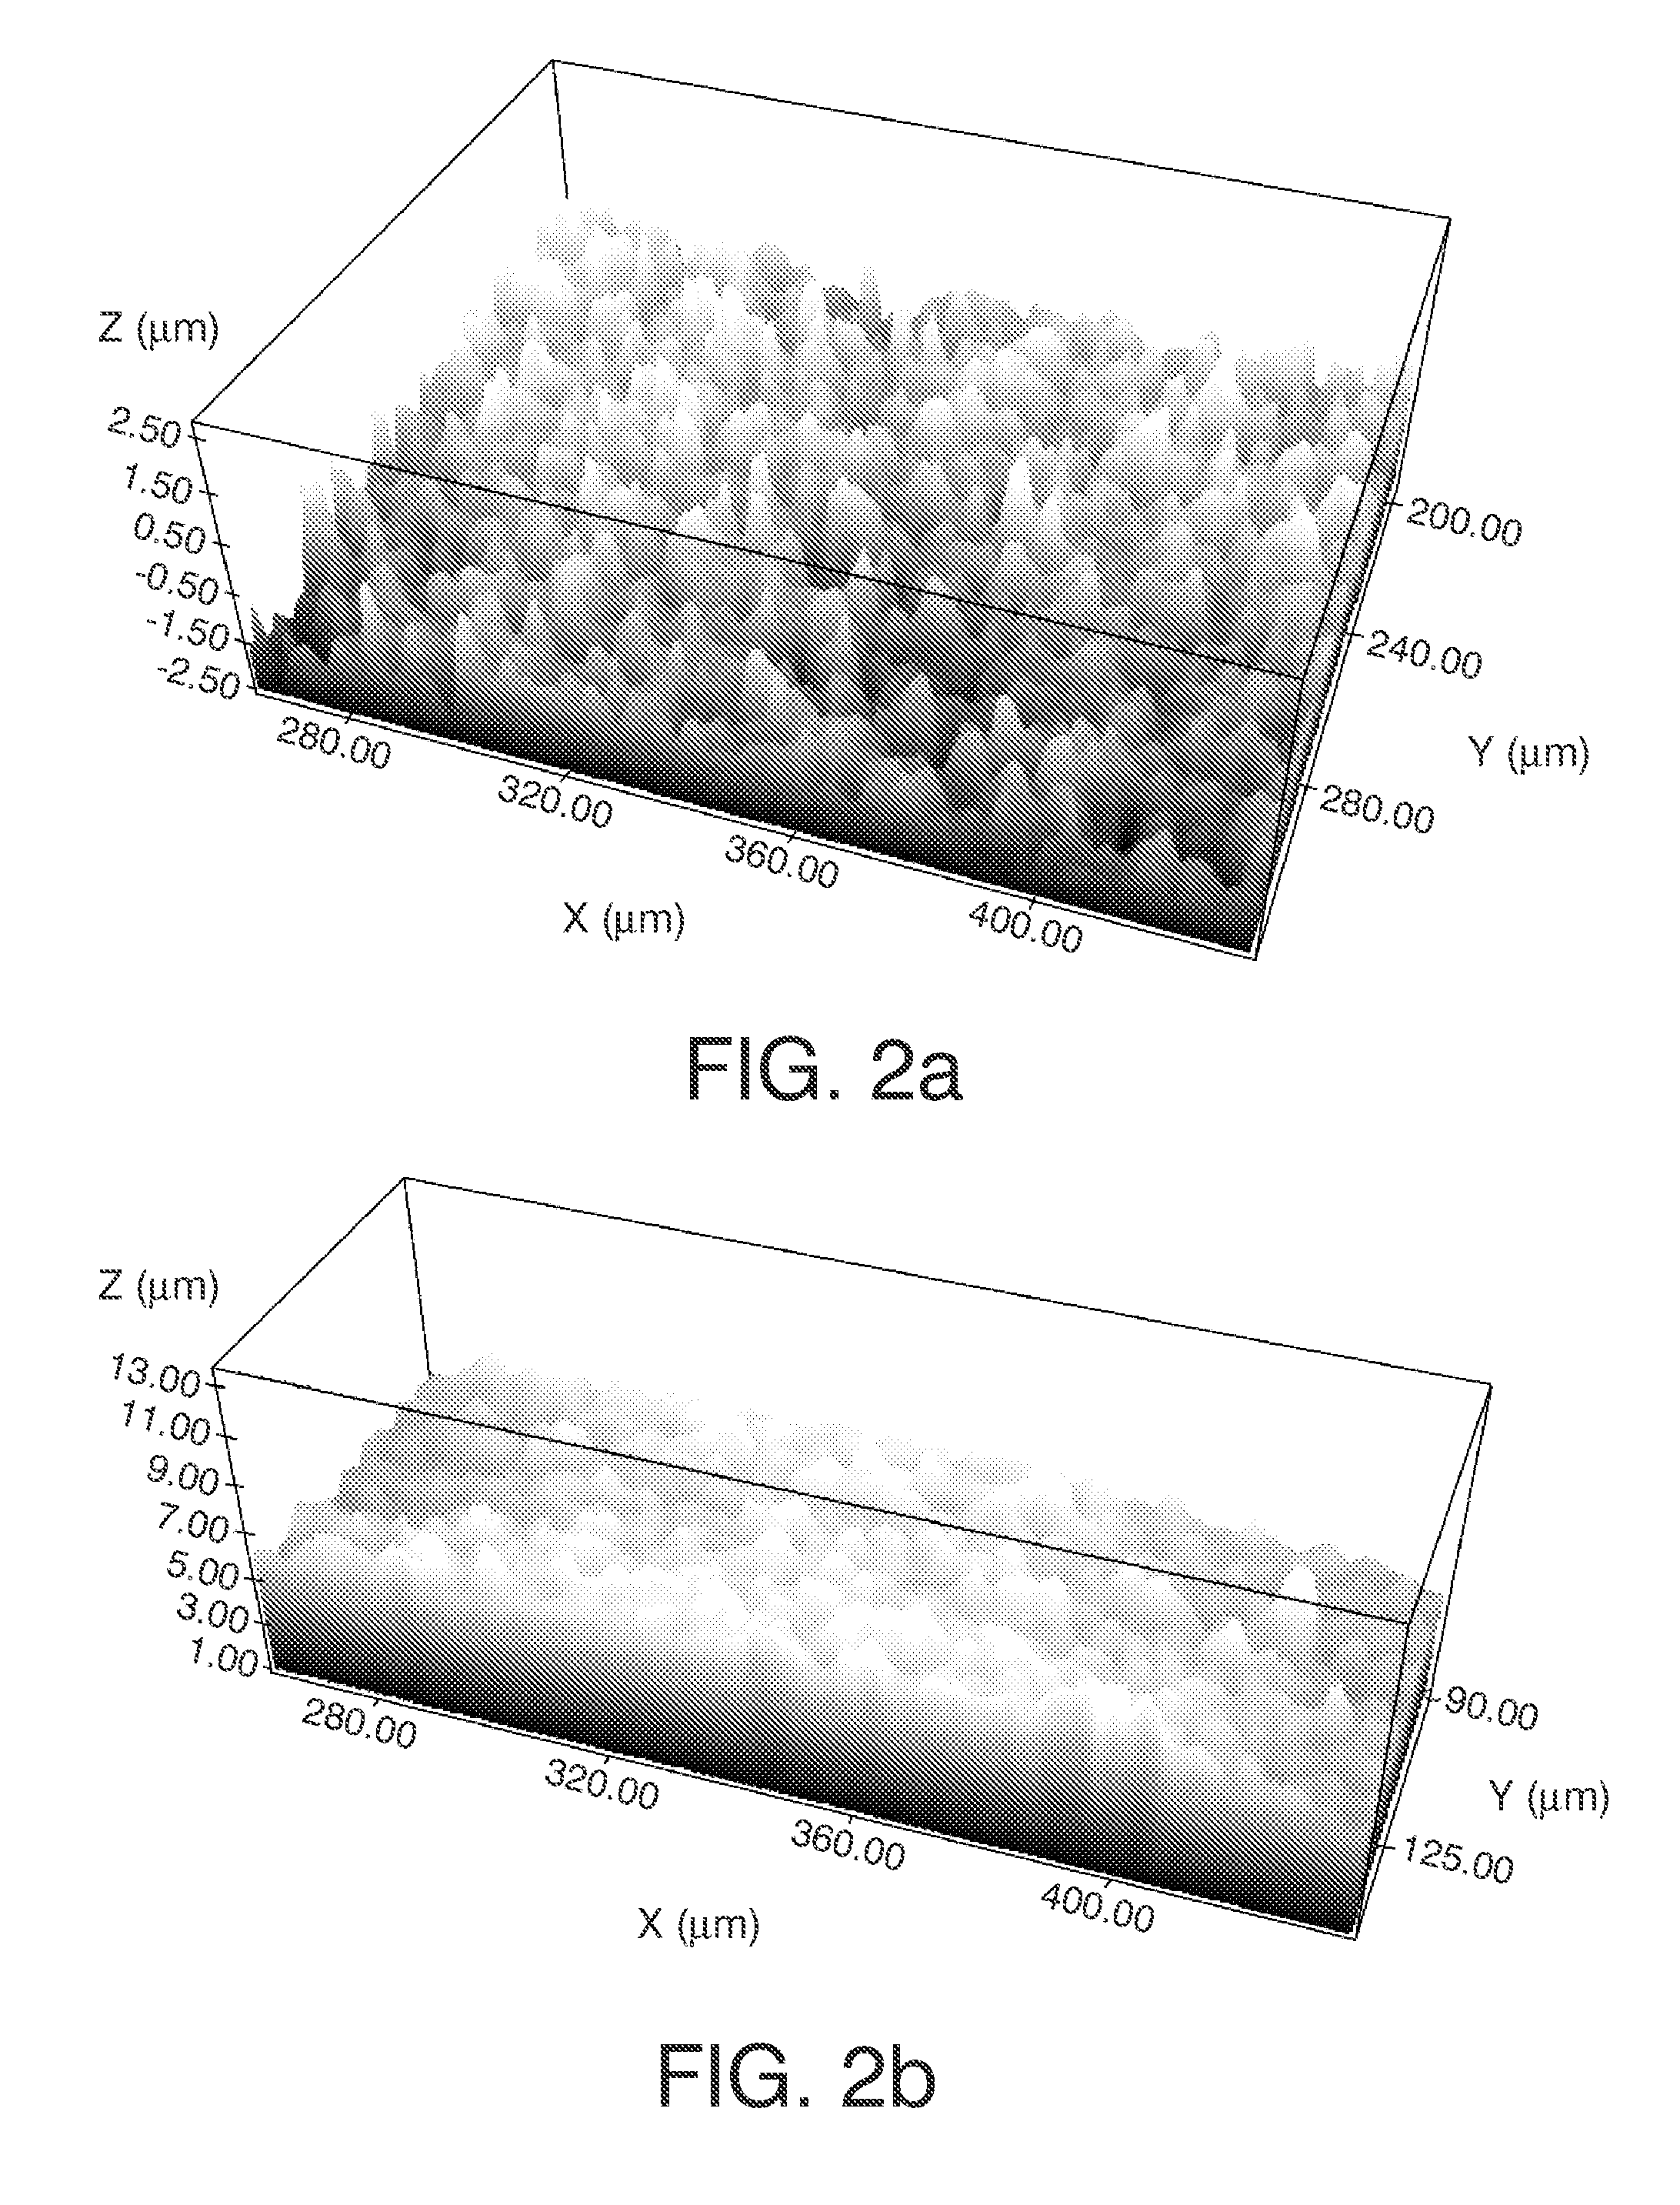 Method for obtaining a surface of titanium-based metal implant to be inserted into bone tissue